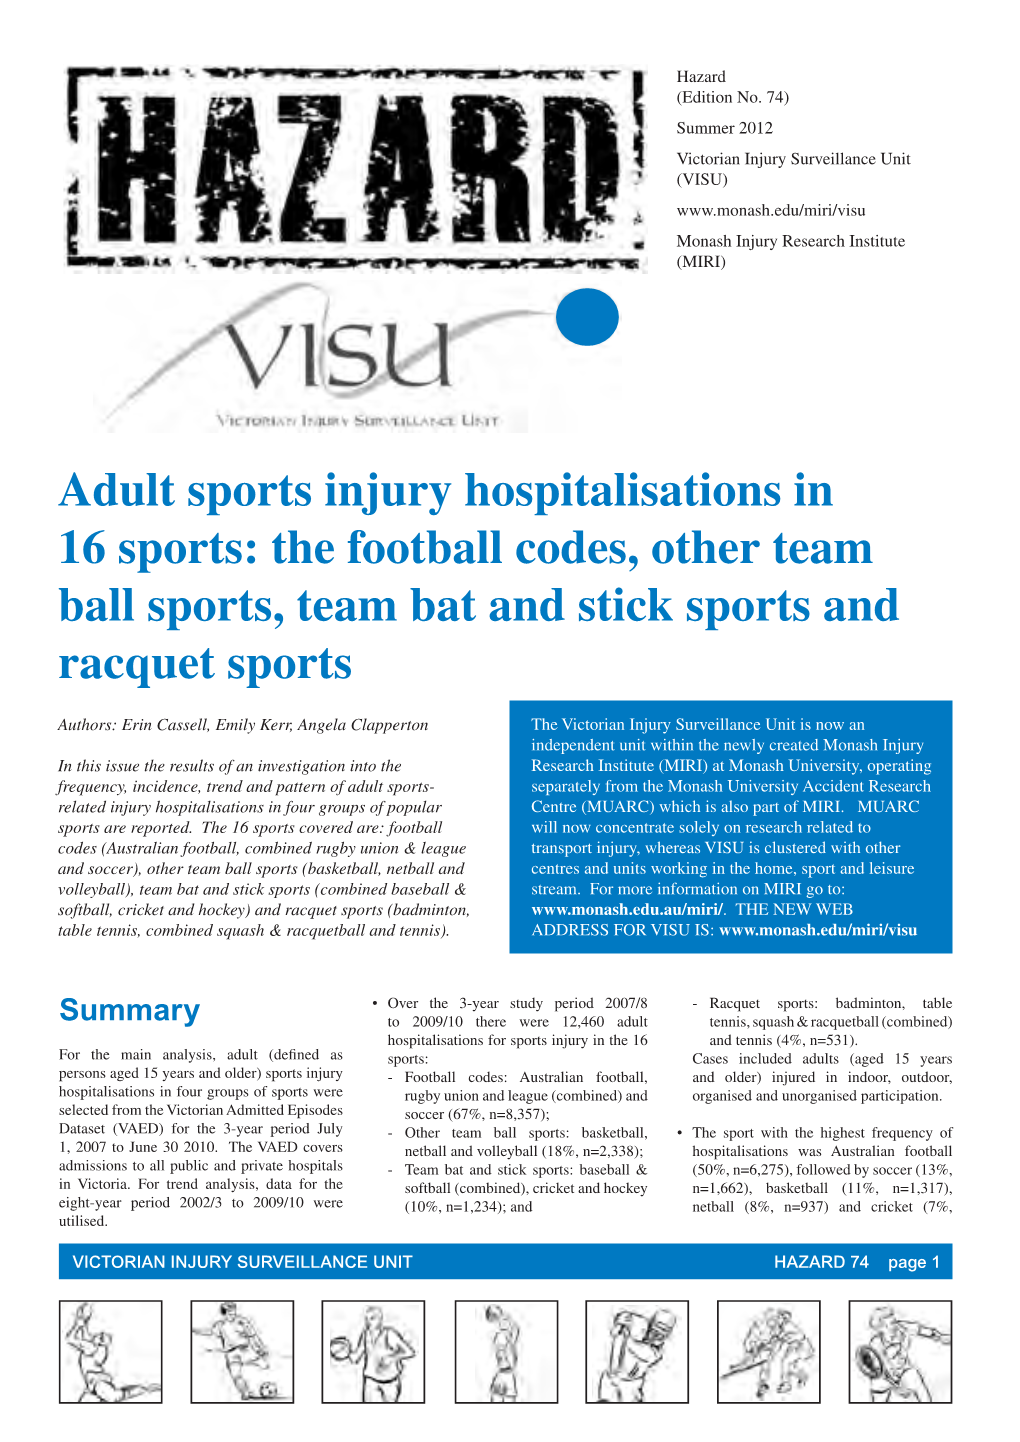 Adult Sports Injury Hospitalisations in 16 Sports: the Football Codes, Other Team Ball Sports, Team Bat and Stick Sports and Racquet Sports